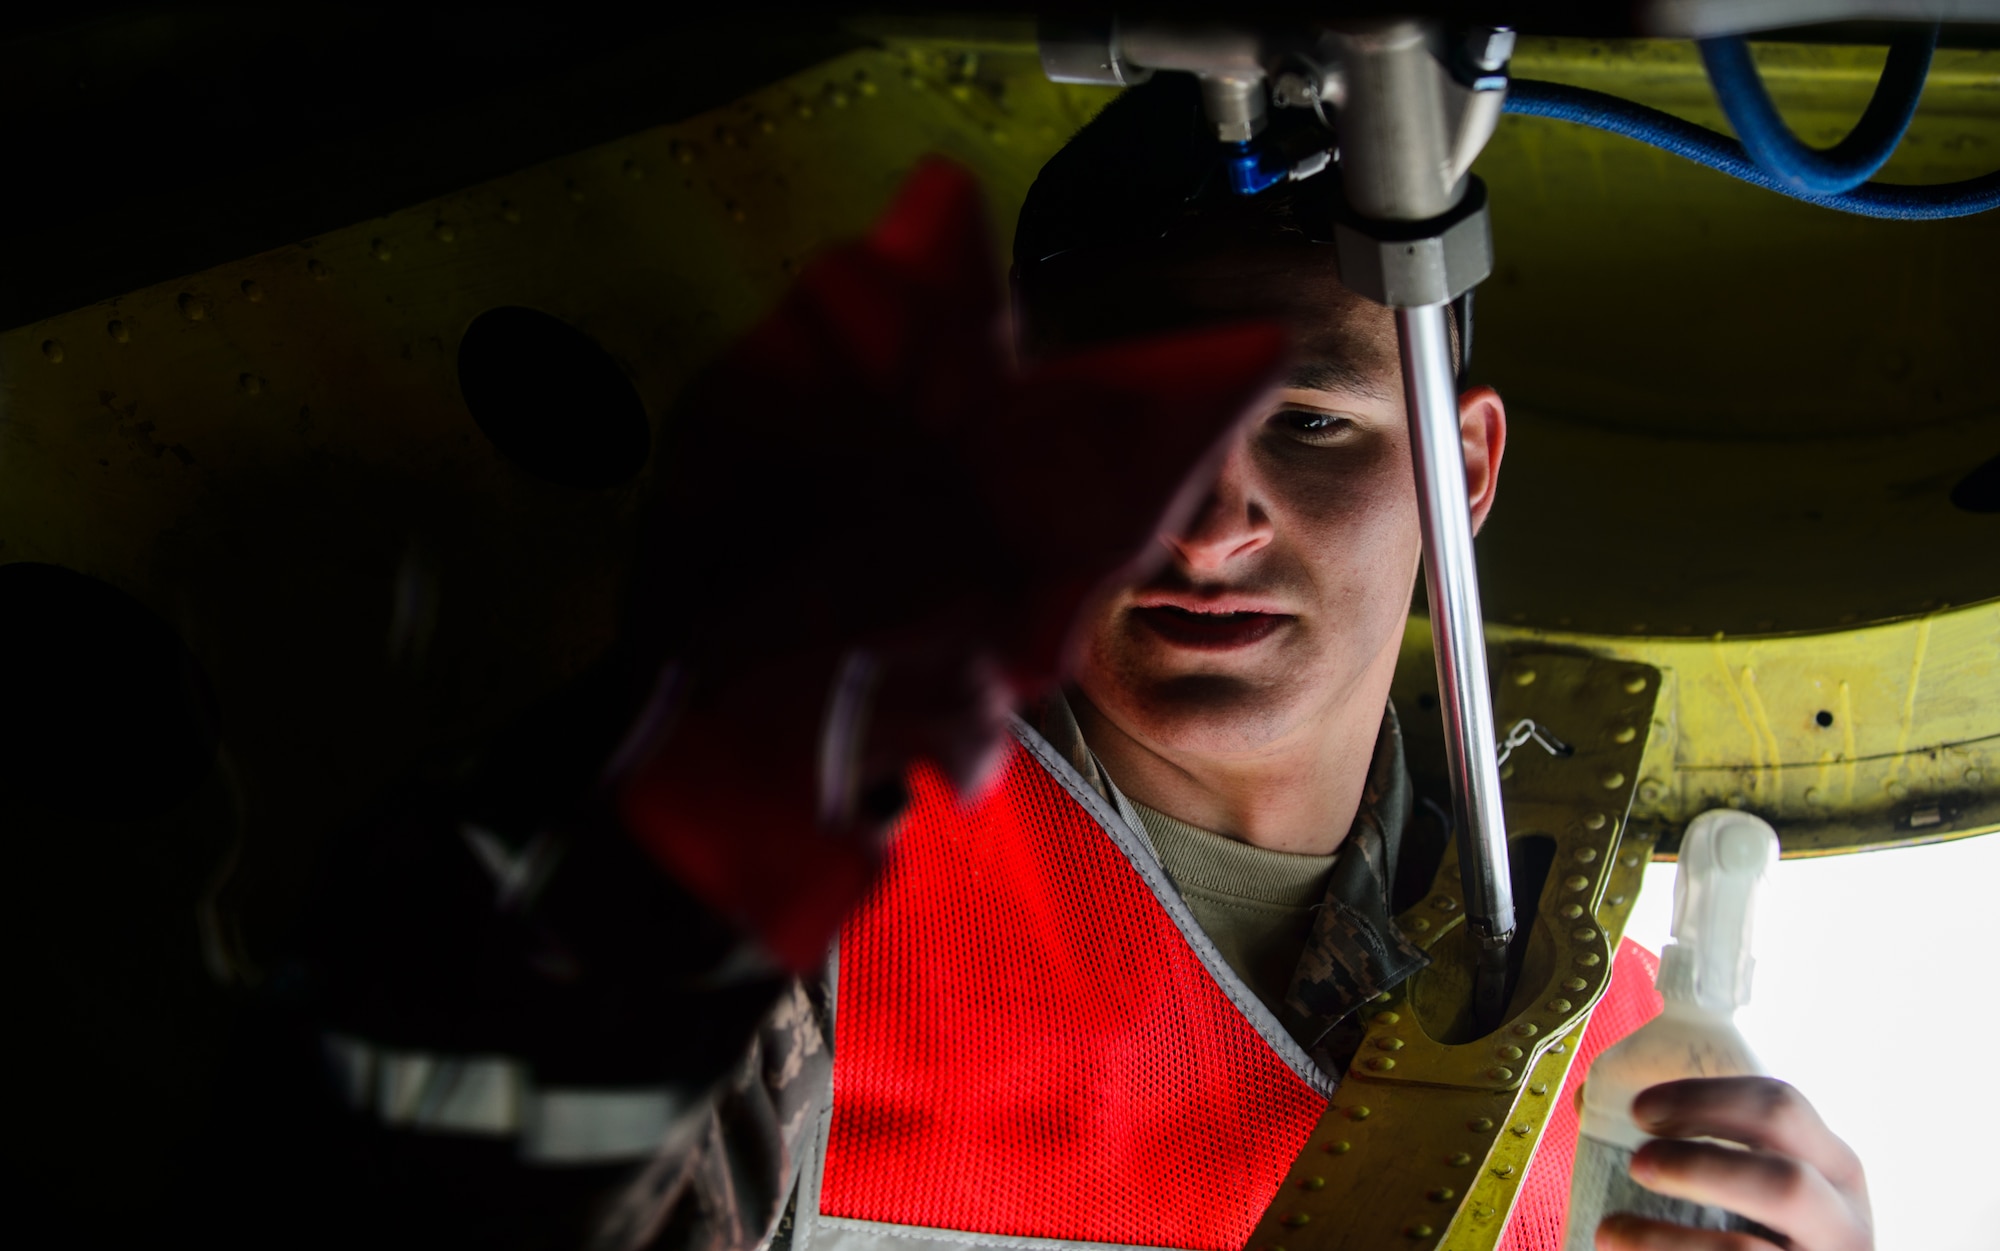 Senior Airman Anthony Palombo, Pennsylvania Air National Guard crew chief, cleans the window used by the boom operator on a KC-135 Stratotanker June 9, 2015 at Riga International Airport, Latvia. Guardsmen from Maryland, Michigan and Pennsylvania came together to support Saber Strike 15 by providing aerial-refueling and close air support. Saber Strike 15 is a joint and multinational exercise designed to promote stability in the Baltic area and provide an opportunity for military members to sharpen their skills. (U.S. Air Force photo/ Staff Sgt. Armando A. Schwier-Morales)